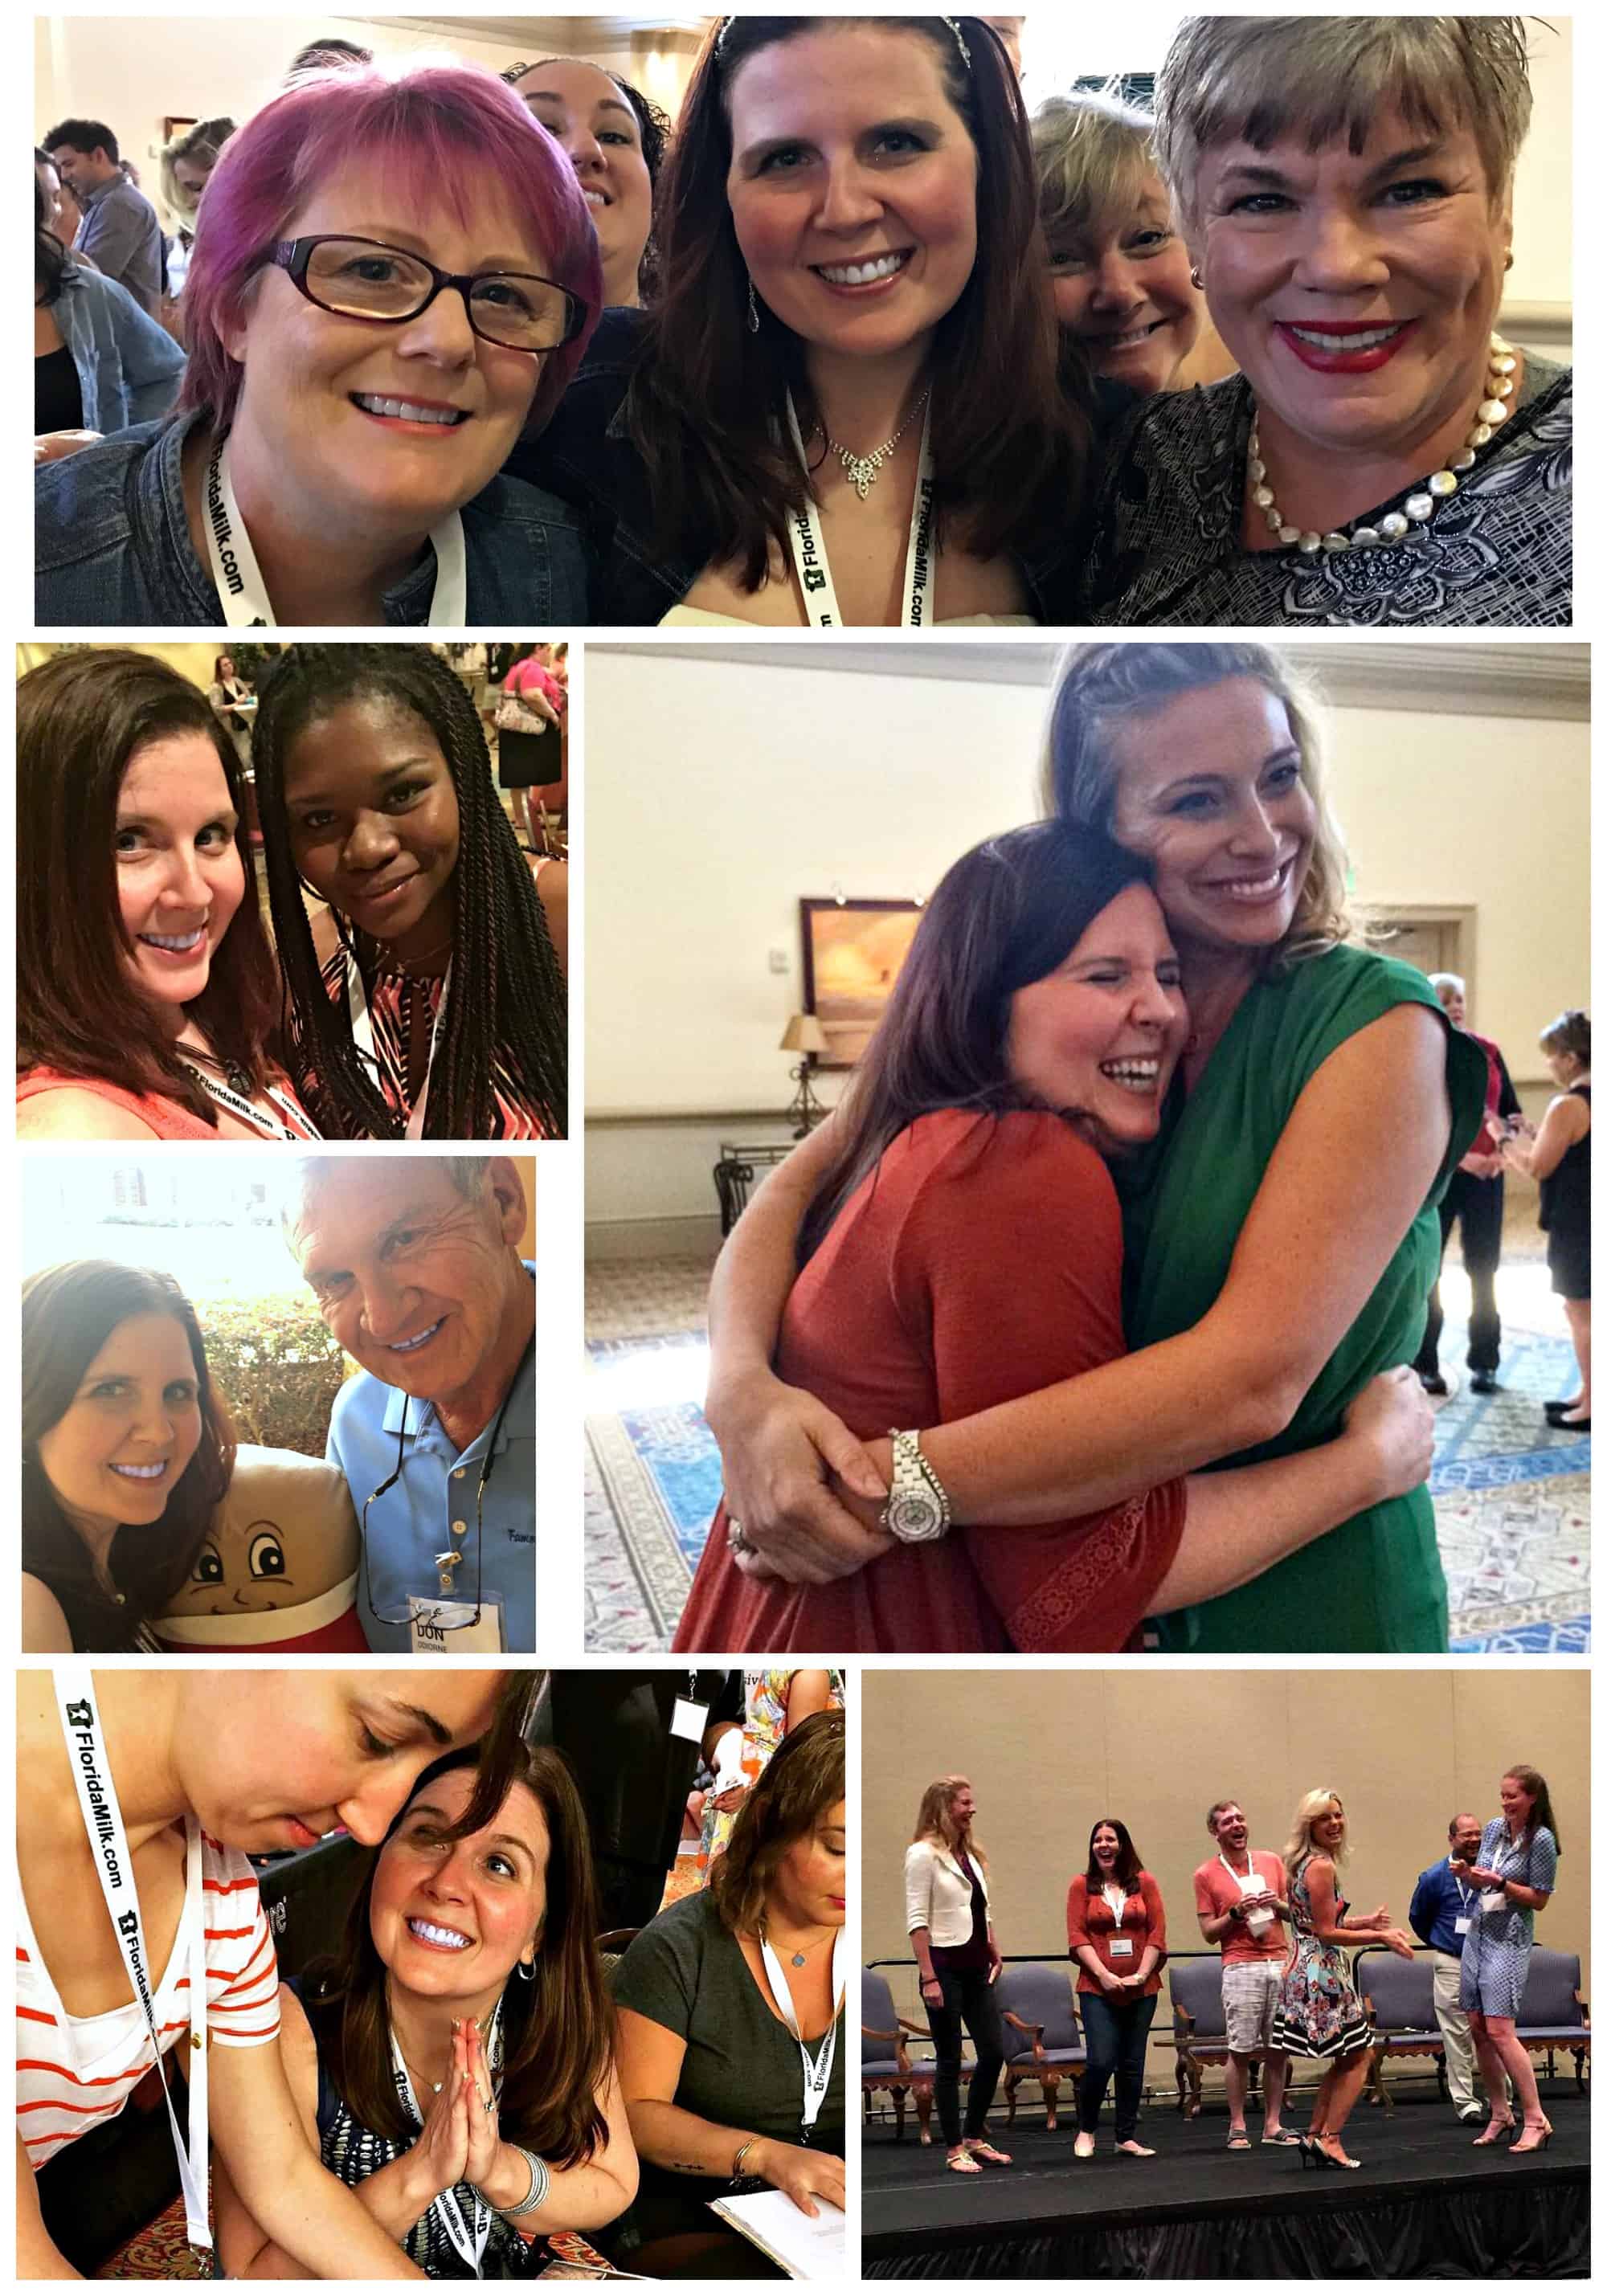 How to Succeed at #FWCon Without Really Trying| Recap - #FWCon Meet